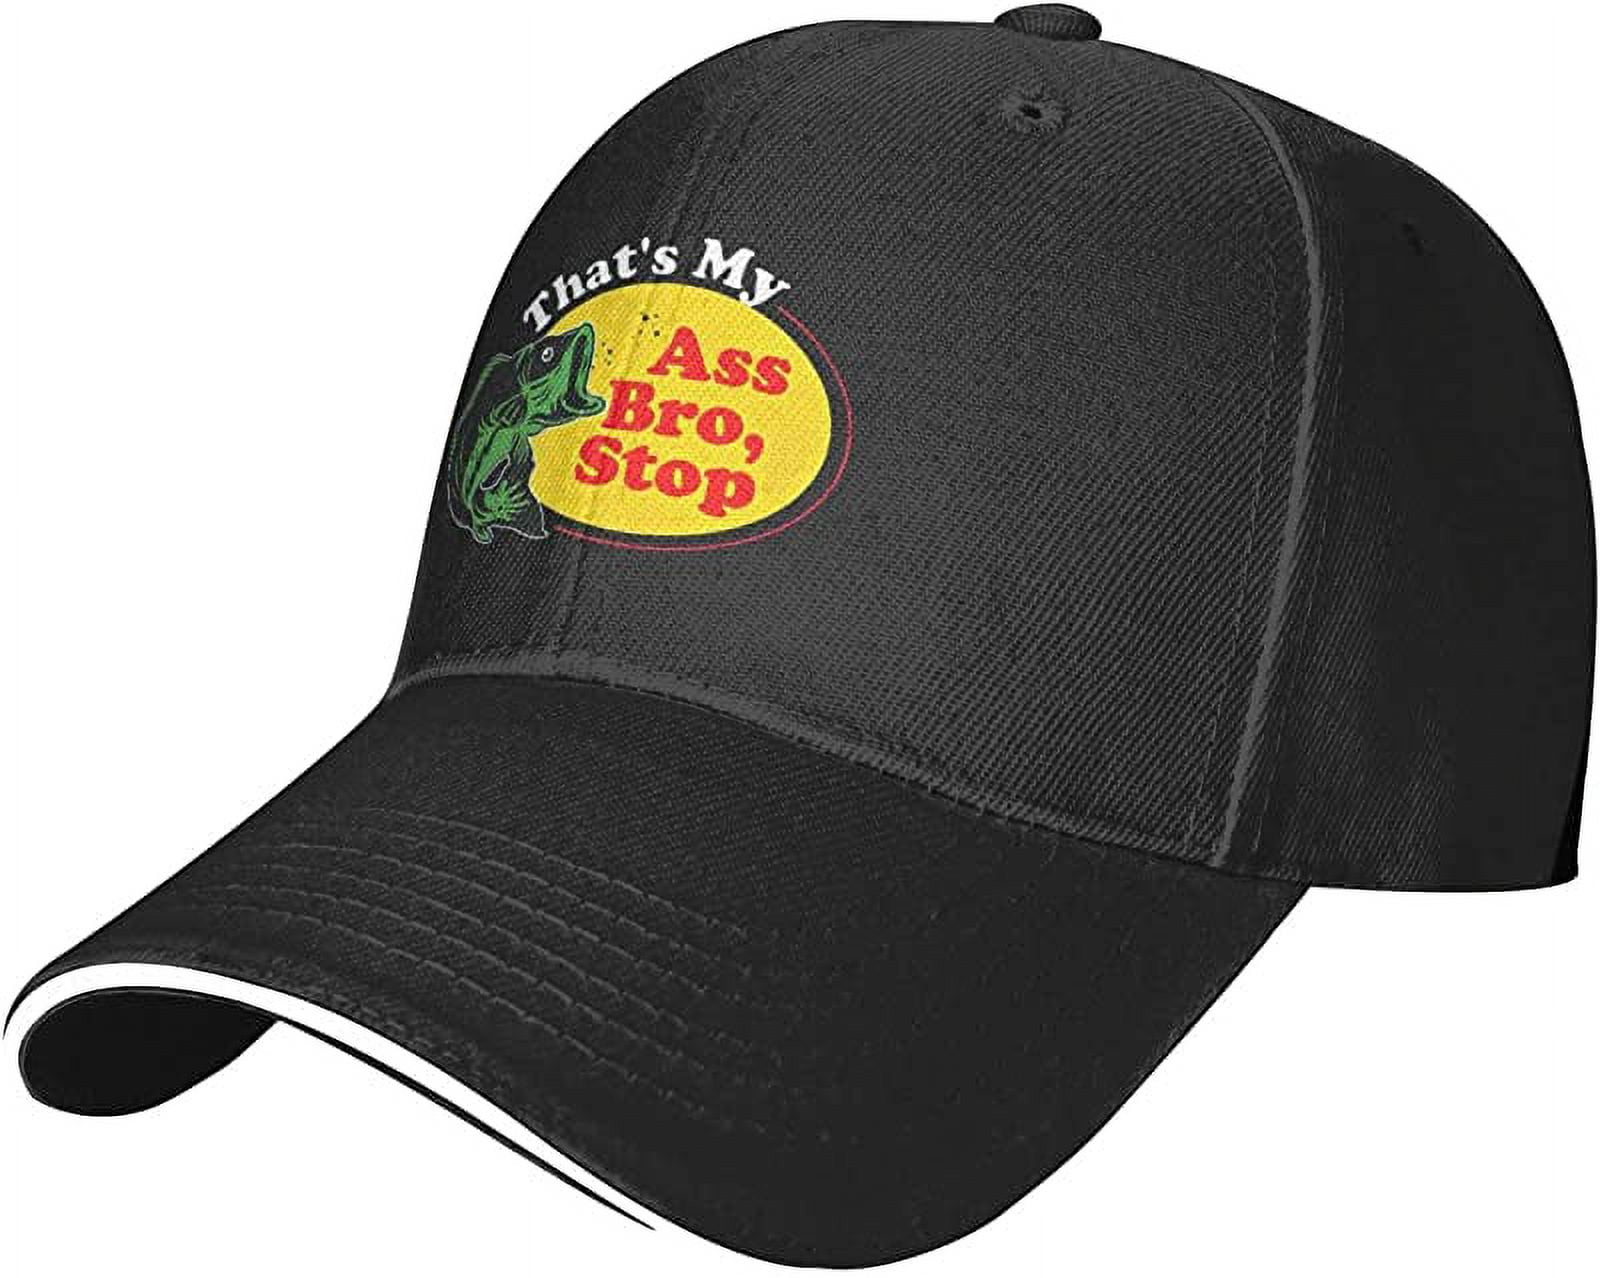 That's My Ass Bro Stop Fishing Baseball Cap for Men Women Snapback Hat  Aldult Curved Brim Casquette Hat Adjustable, One Size 